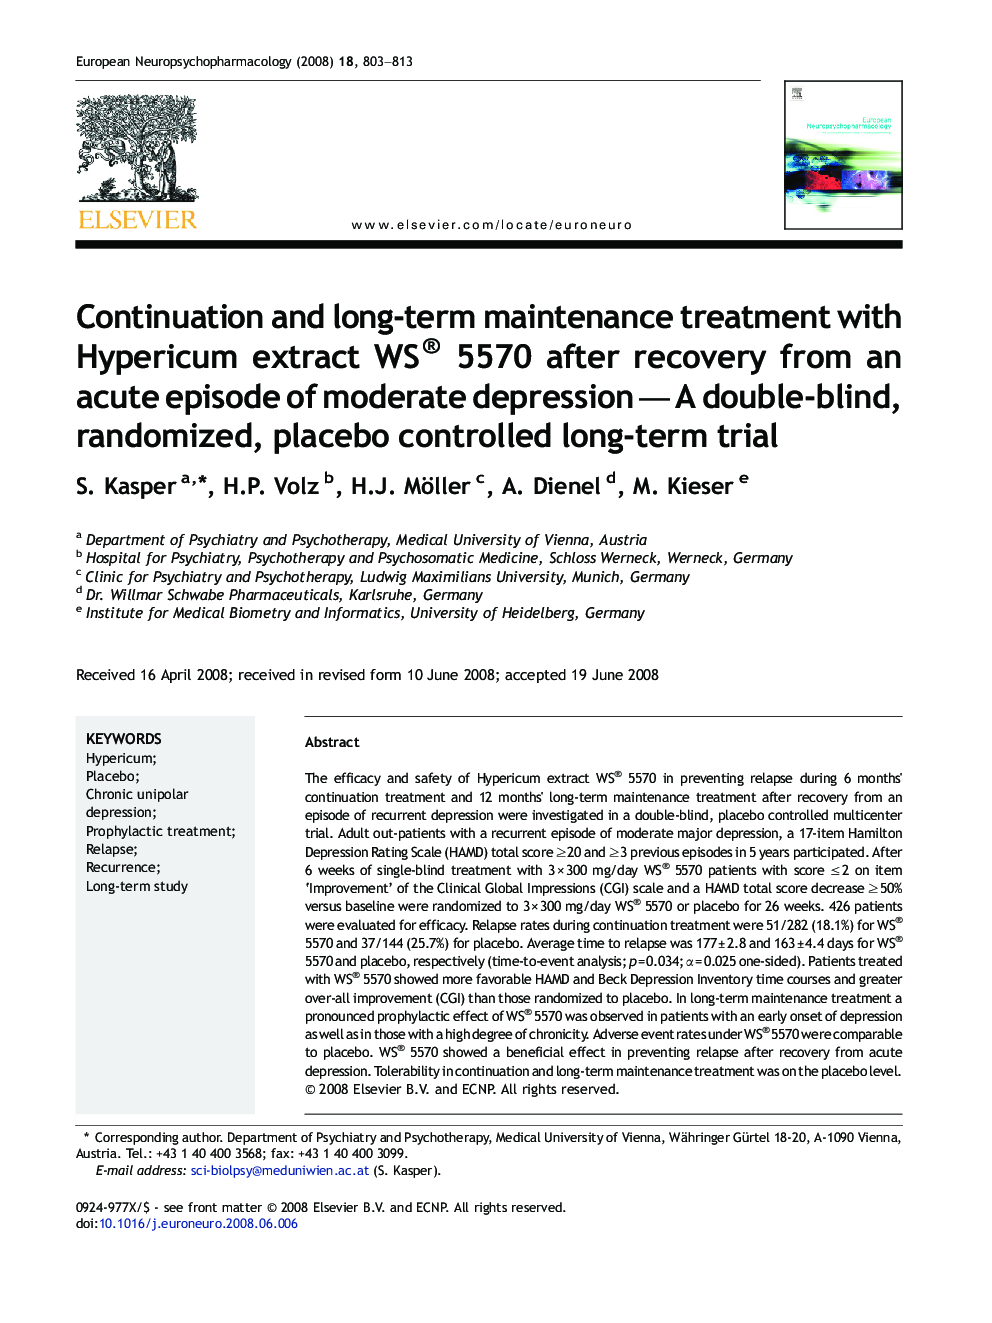 Continuation and long-term maintenance treatment with Hypericum extract WS® 5570 after recovery from an acute episode of moderate depression — A double-blind, randomized, placebo controlled long-term trial